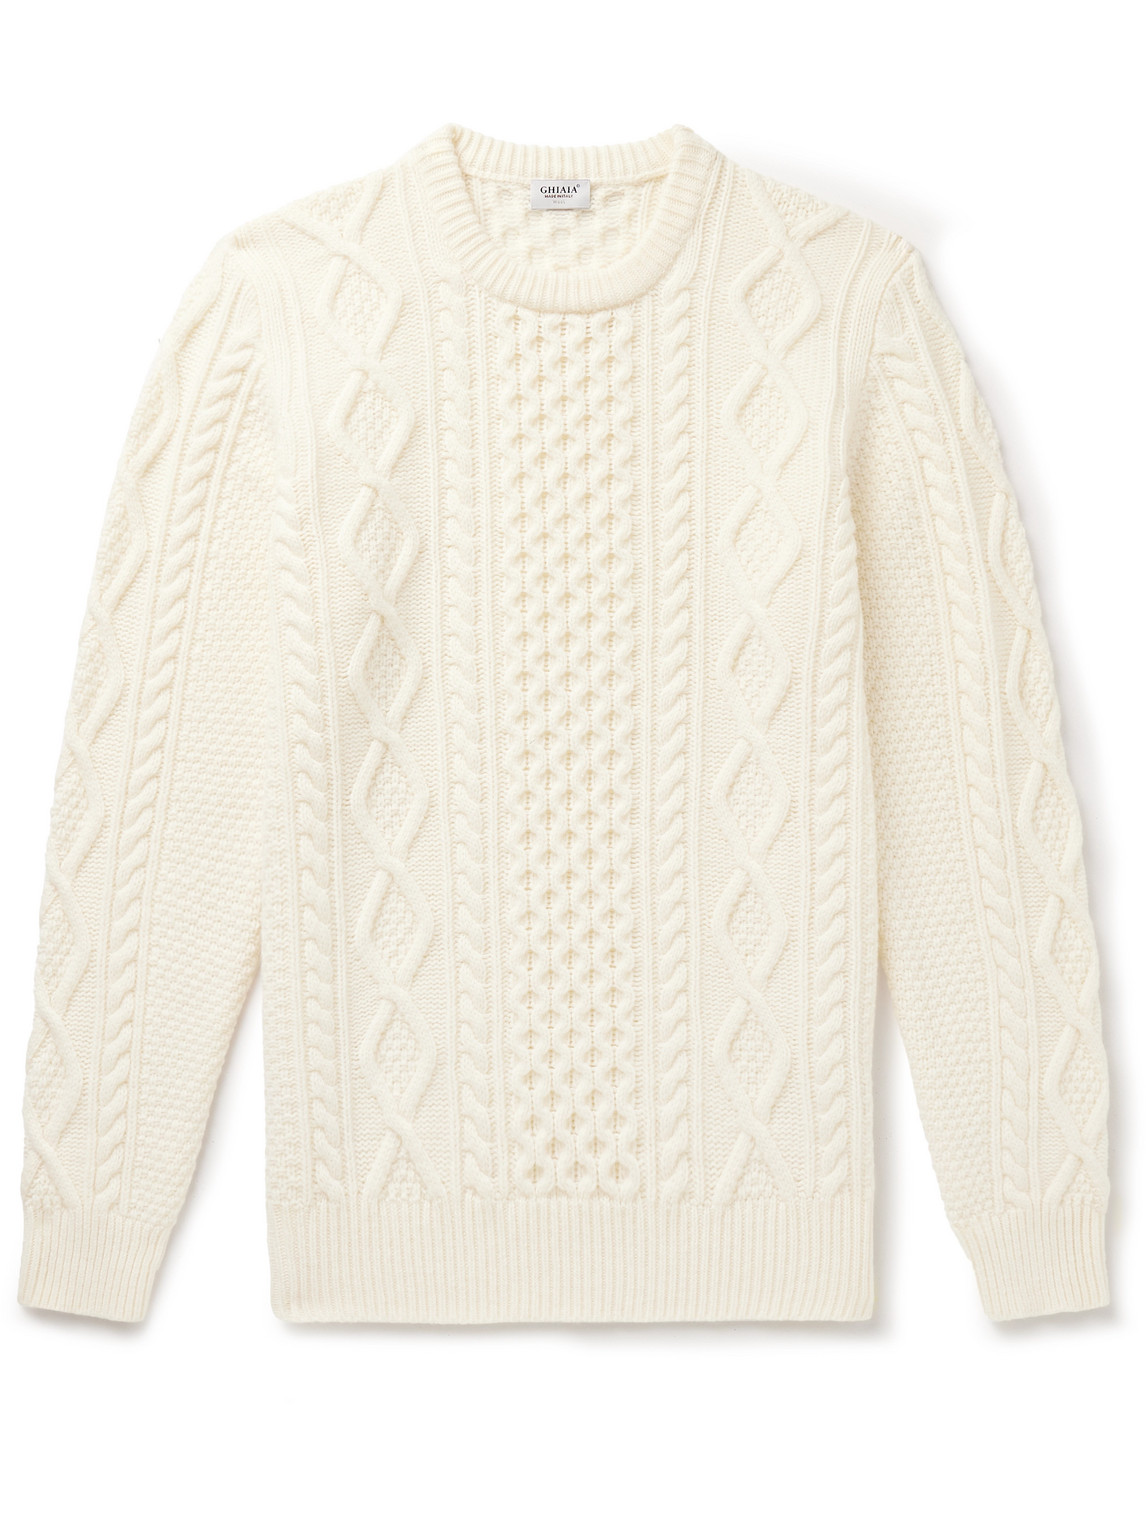 Pescatore Cable-Knit Wool Sweater